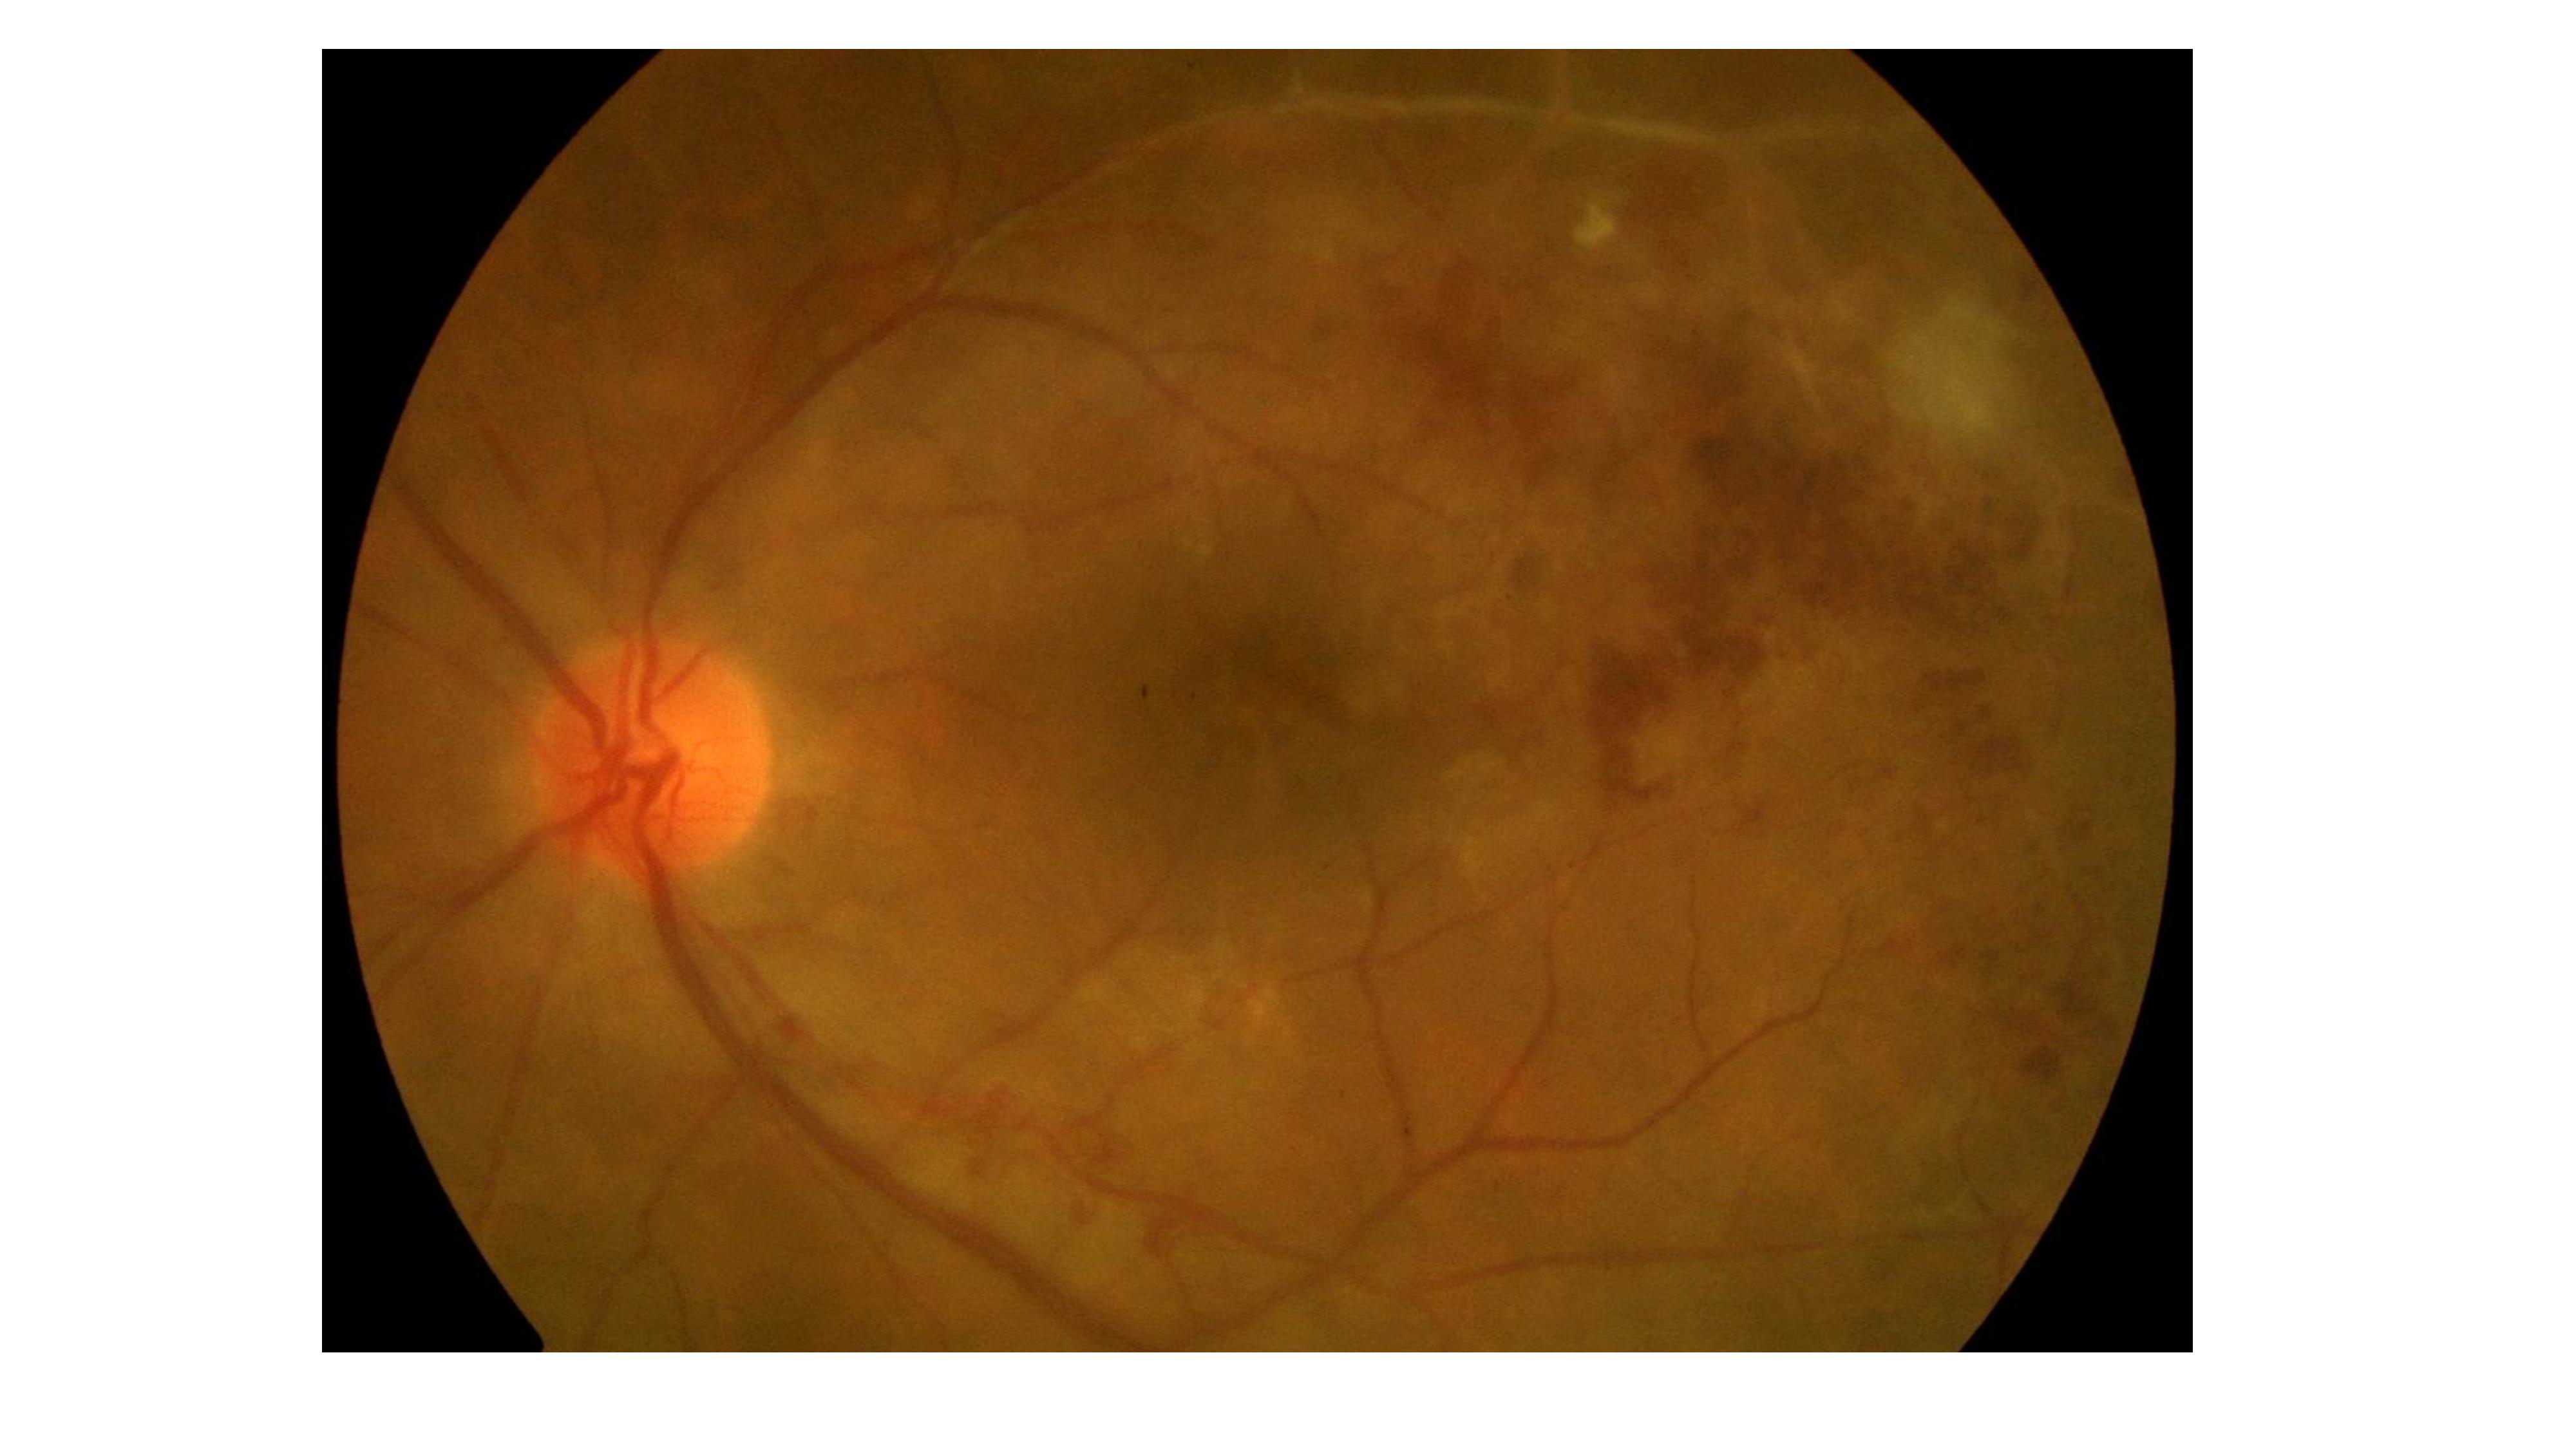 TB delayed hypersensitivity uveitis (Eales’ disease) presenting with hemorrhagic ischemic vascular occlusion. Note the retinal hemorrhages and the vascular obliteration and sheathing temporal to the macula. 